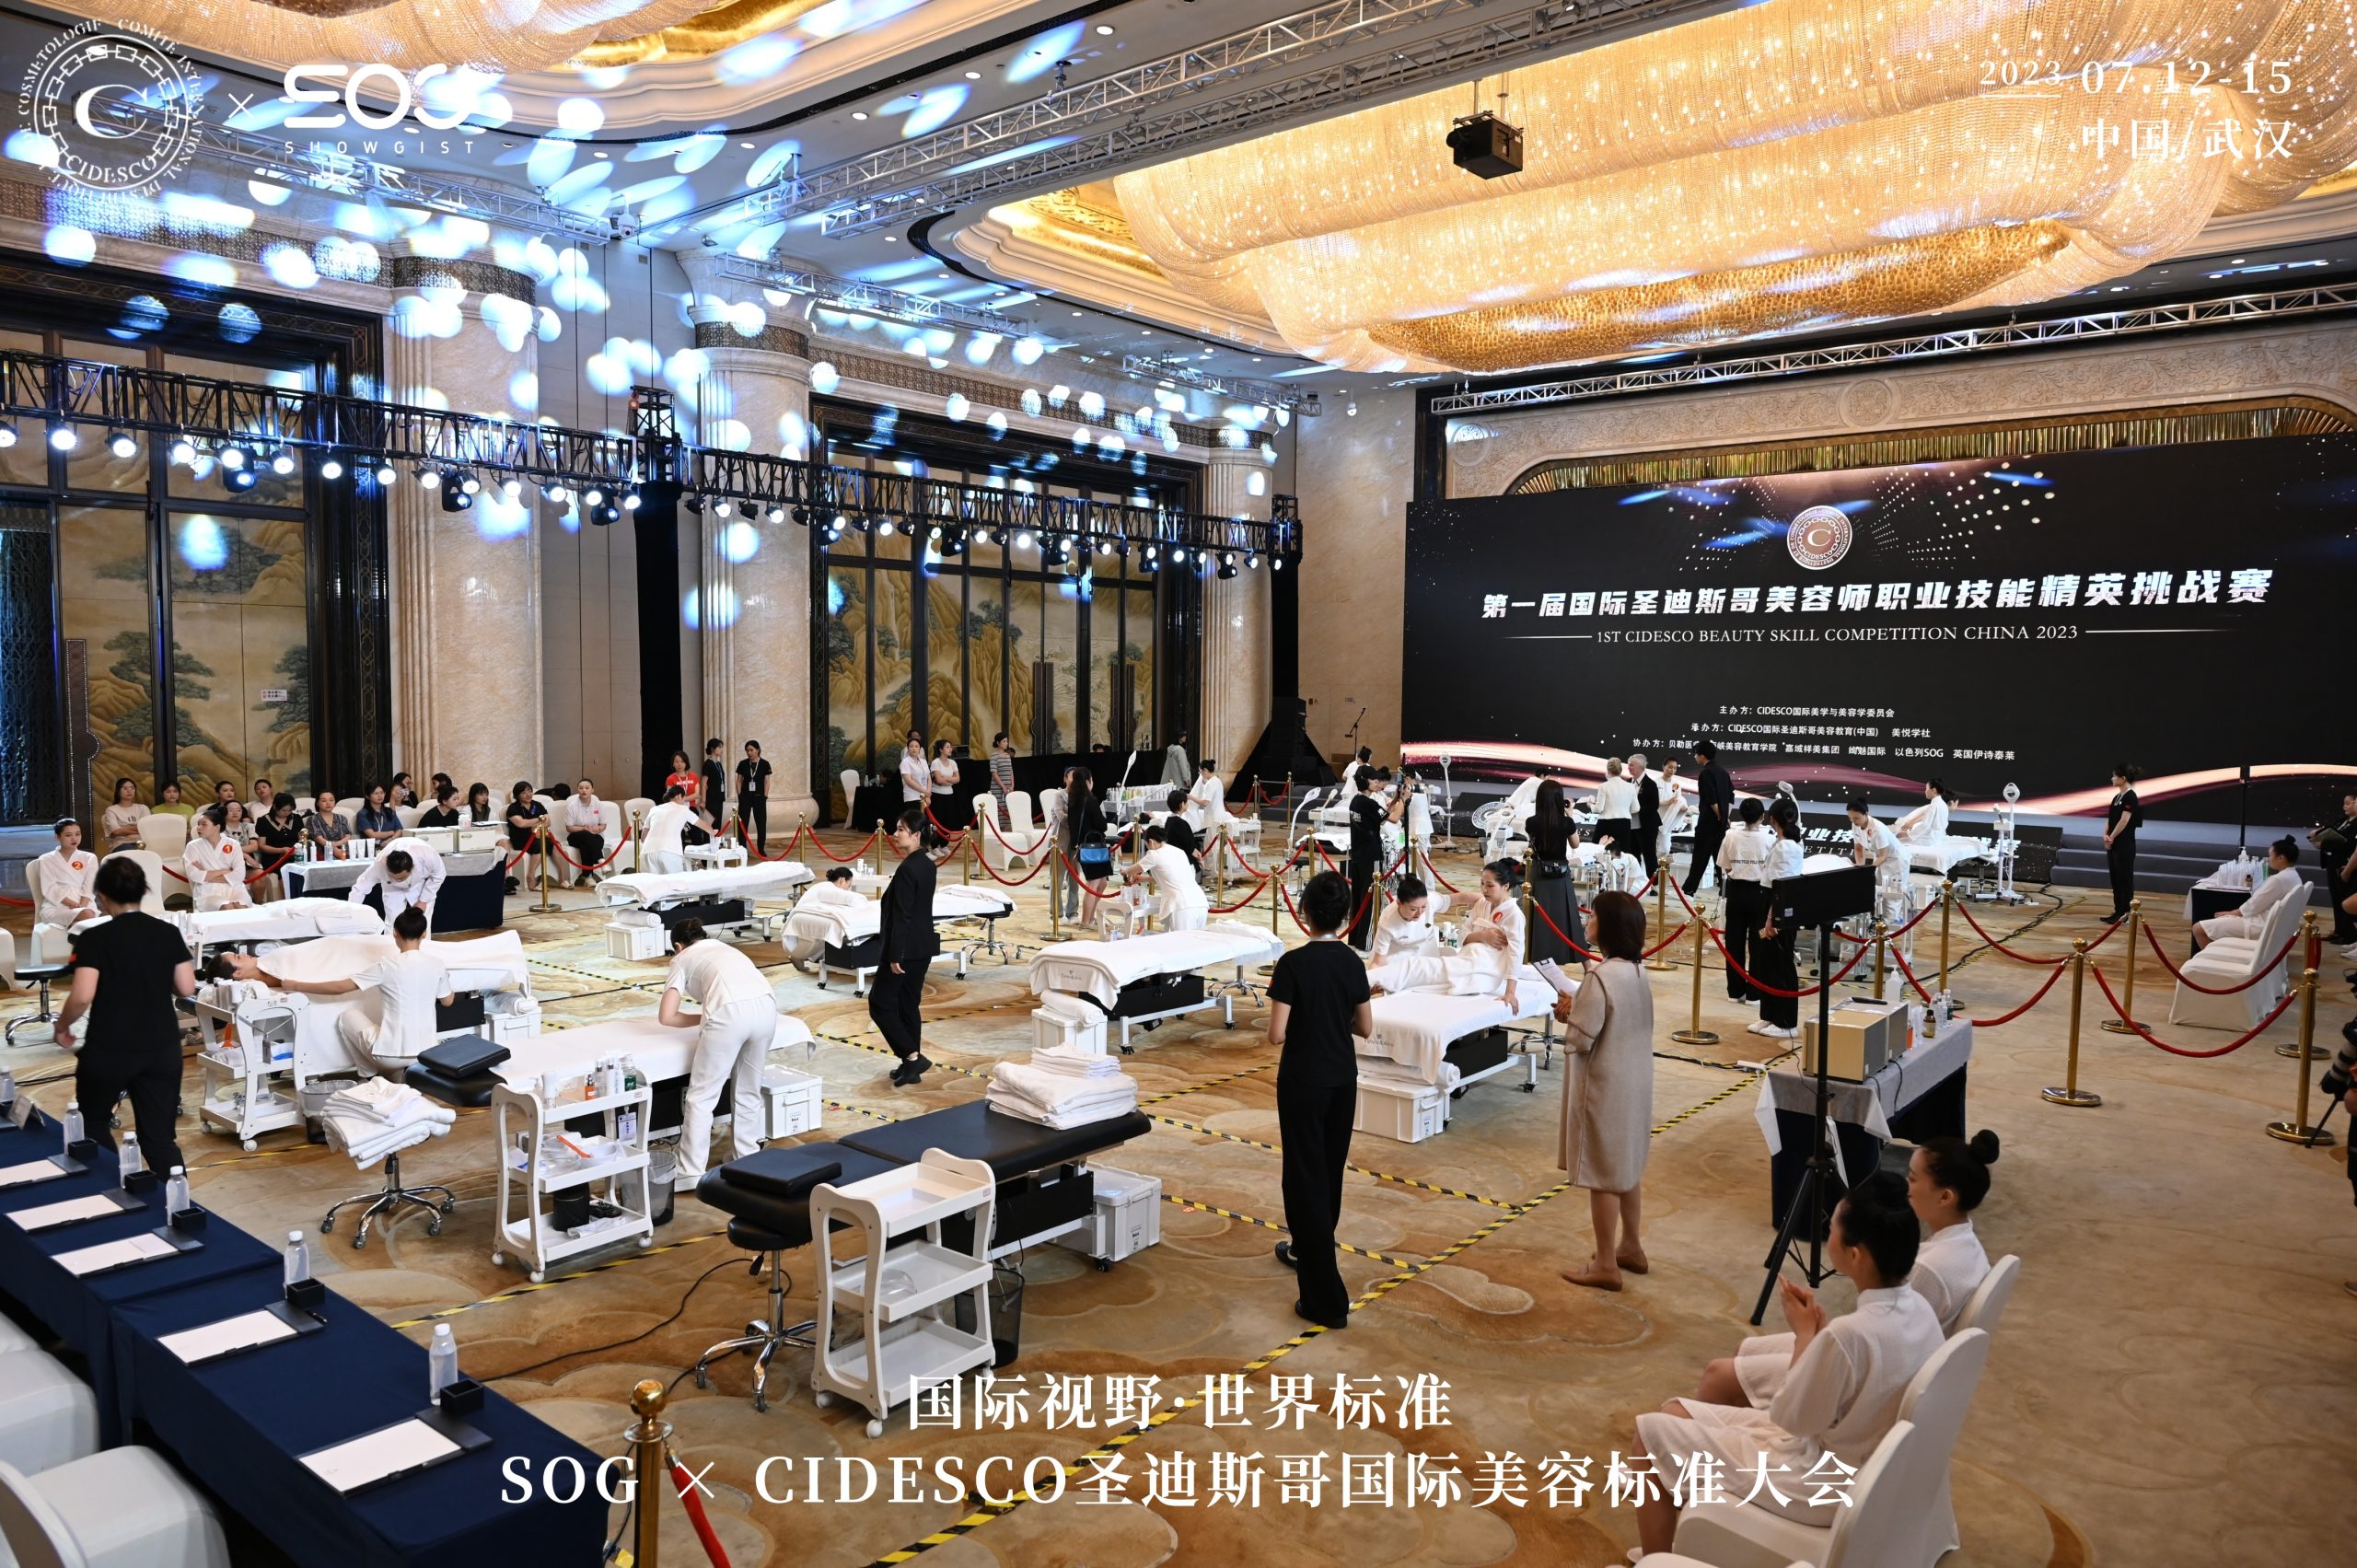 SOG collaborates with CIDESCO San Diego to usher in a new era of Chinese beauty industry with world standards!